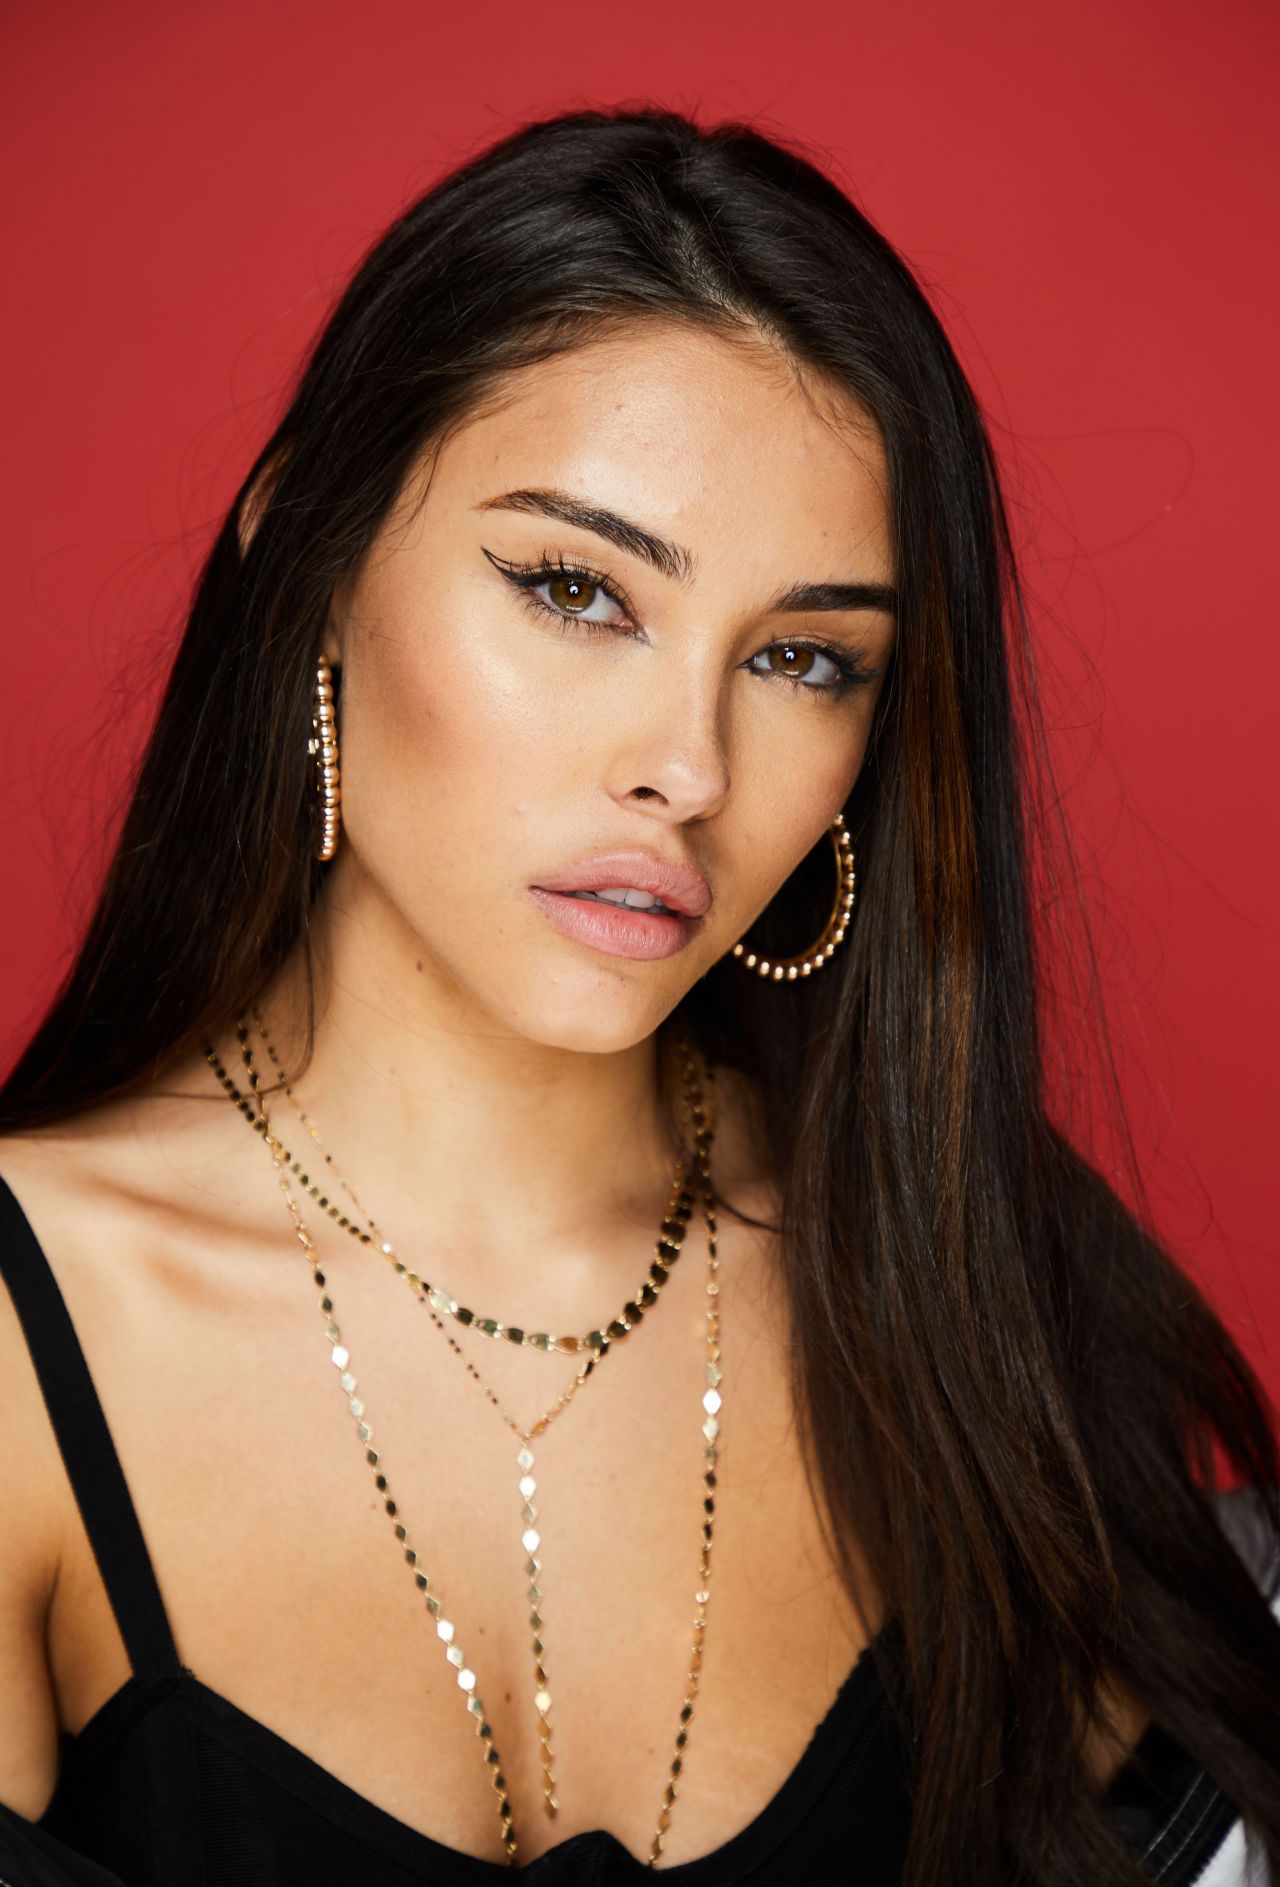 Madison Beer Portrait at KIIS-FM Wallpapers